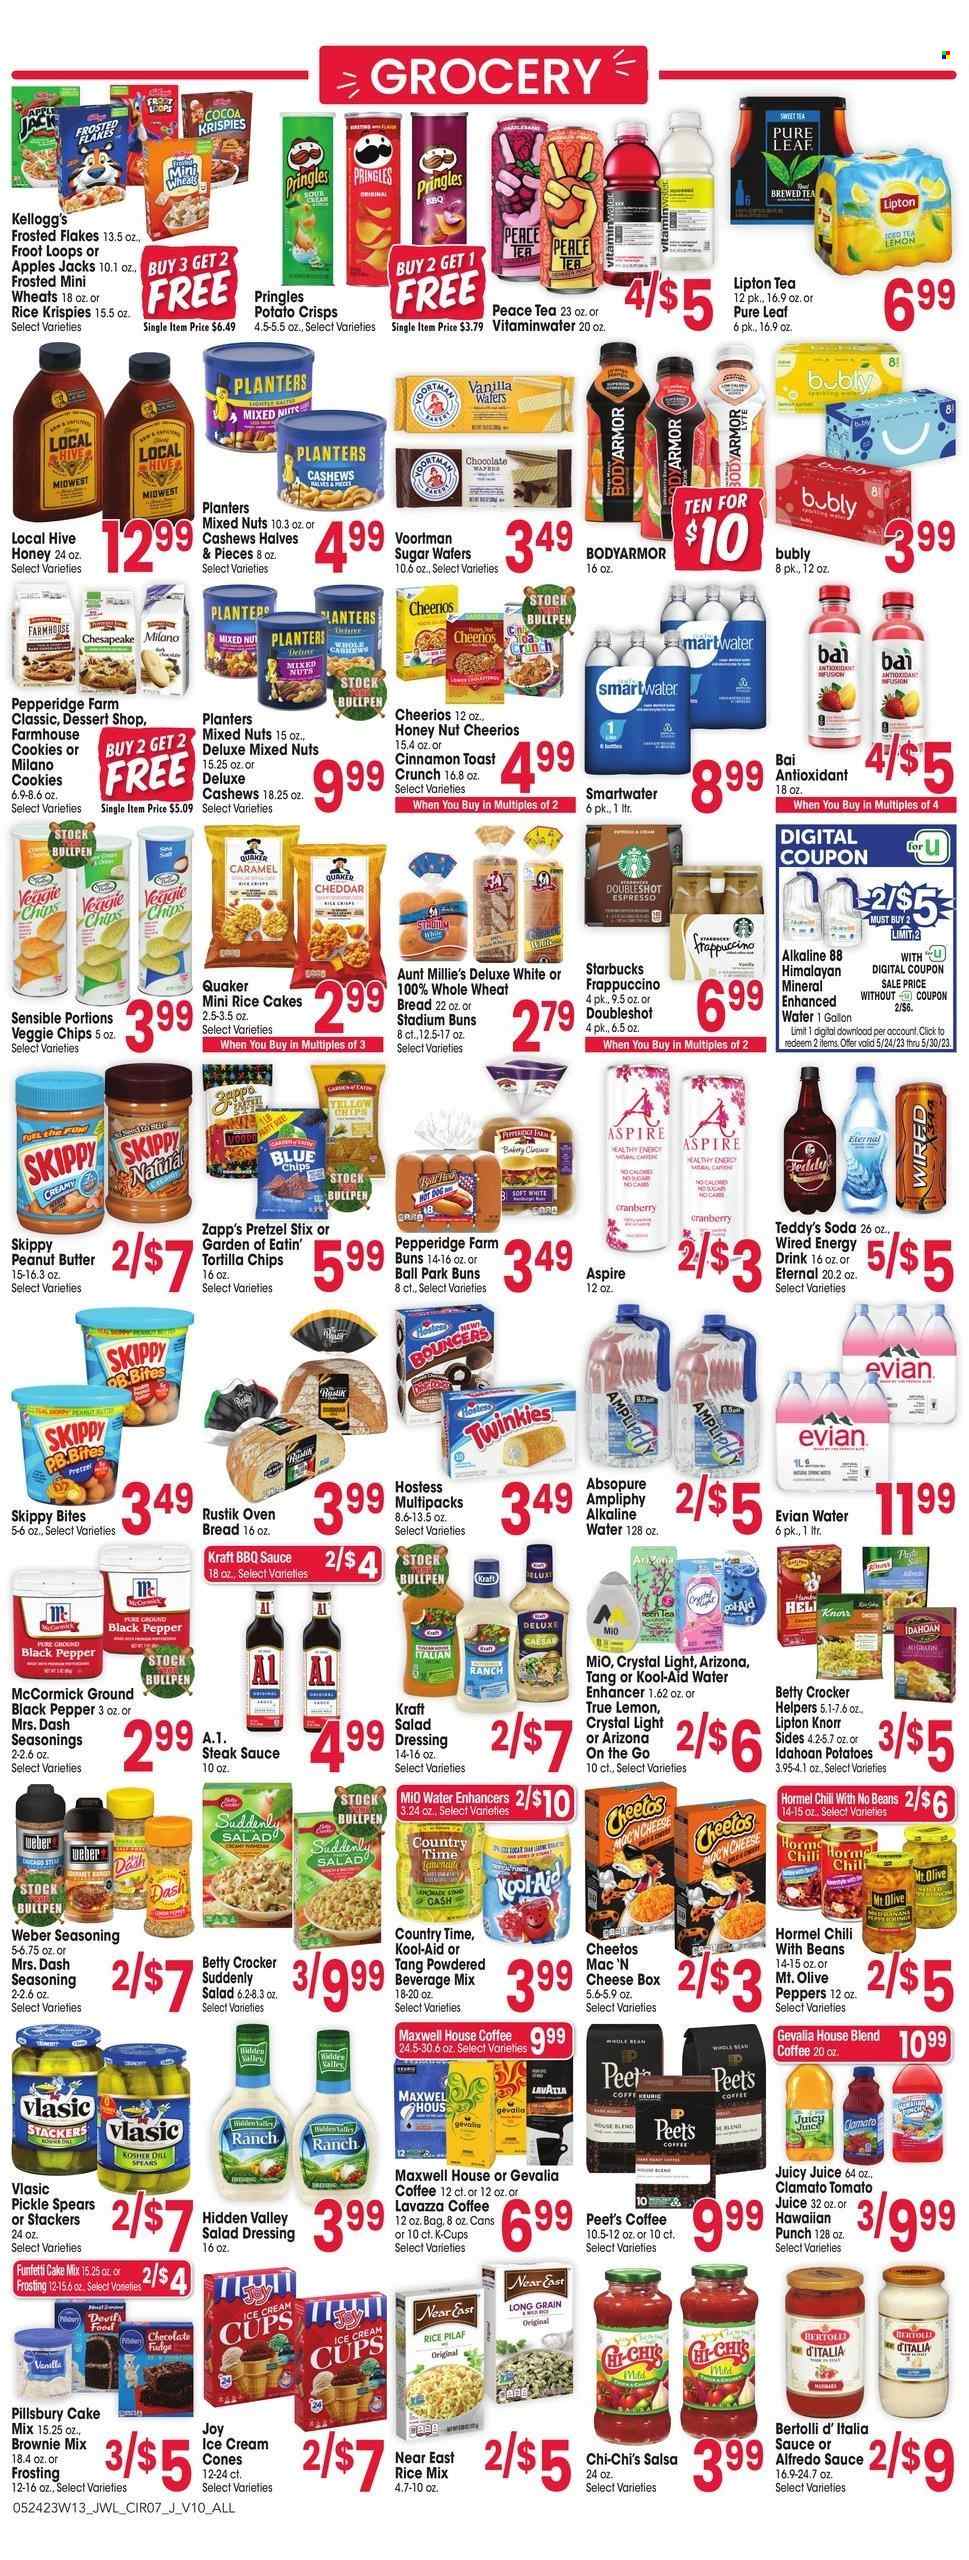 thumbnail - Jewel Osco Flyer - 05/24/2023 - 05/30/2023 - Sales products - wheat bread, pretzels, buns, dessert, brownie mix, cake mix, peppers, apples, hot dog, Knorr, sauce, Pillsbury, Quaker, Alfredo sauce, Kraft®, Bertolli, Hormel, ready meal, ice cream, cookies, fudge, wafers, Kellogg's, waffle cones, tortilla chips, potato crisps, Pringles, Cheetos, chips, salty snack, cocoa, frosting, Cheerios, Rice Krispies, Frosted Flakes, dill, spice, cinnamon, BBQ sauce, caramel, salad dressing, steak sauce, dressing, salsa, peanut butter, syrup, cashews, mixed nuts, Planters, lemonade, tomato juice, juice, energy drink, Lipton, ice tea, Clamato, AriZona, Bai, Country Time, soda, Smartwater, alkaline water, Evian, powder drink, Maxwell House, Pure Leaf, coffee, Starbucks, coffee capsules, K-Cups, Gevalia, frappuccino, Keurig, Lavazza, steak, Weber. Page 7.